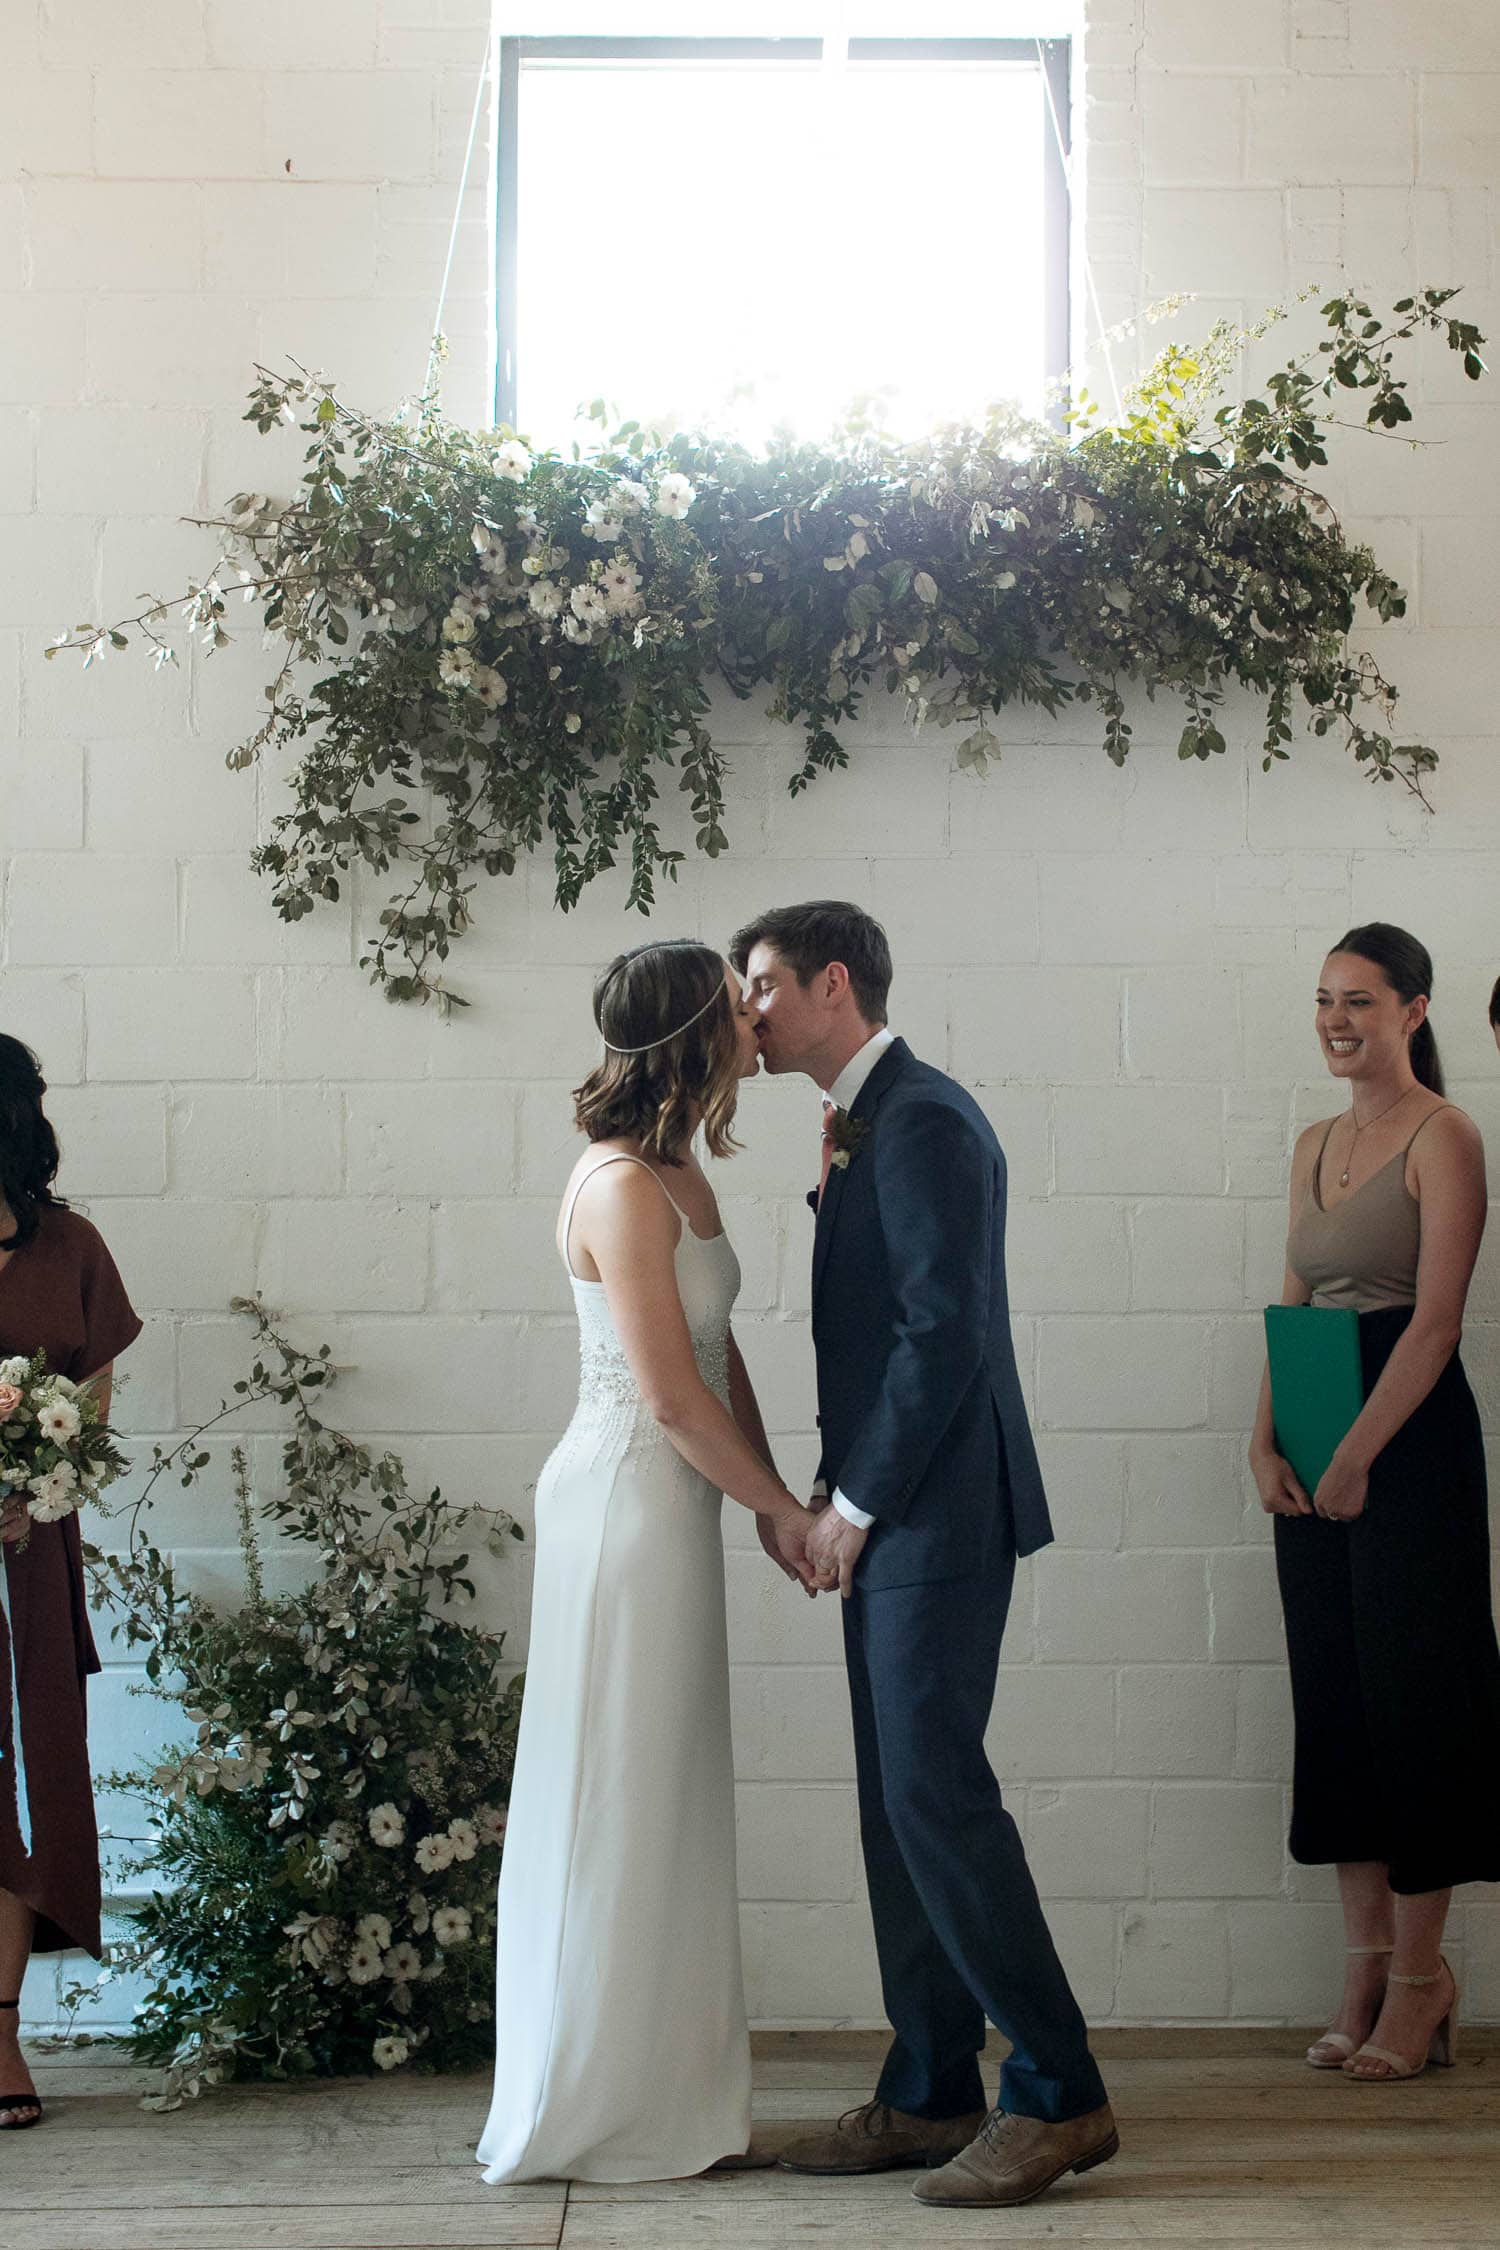 A couple kissing at their wedding ceremony which is decorated by white and greenery.